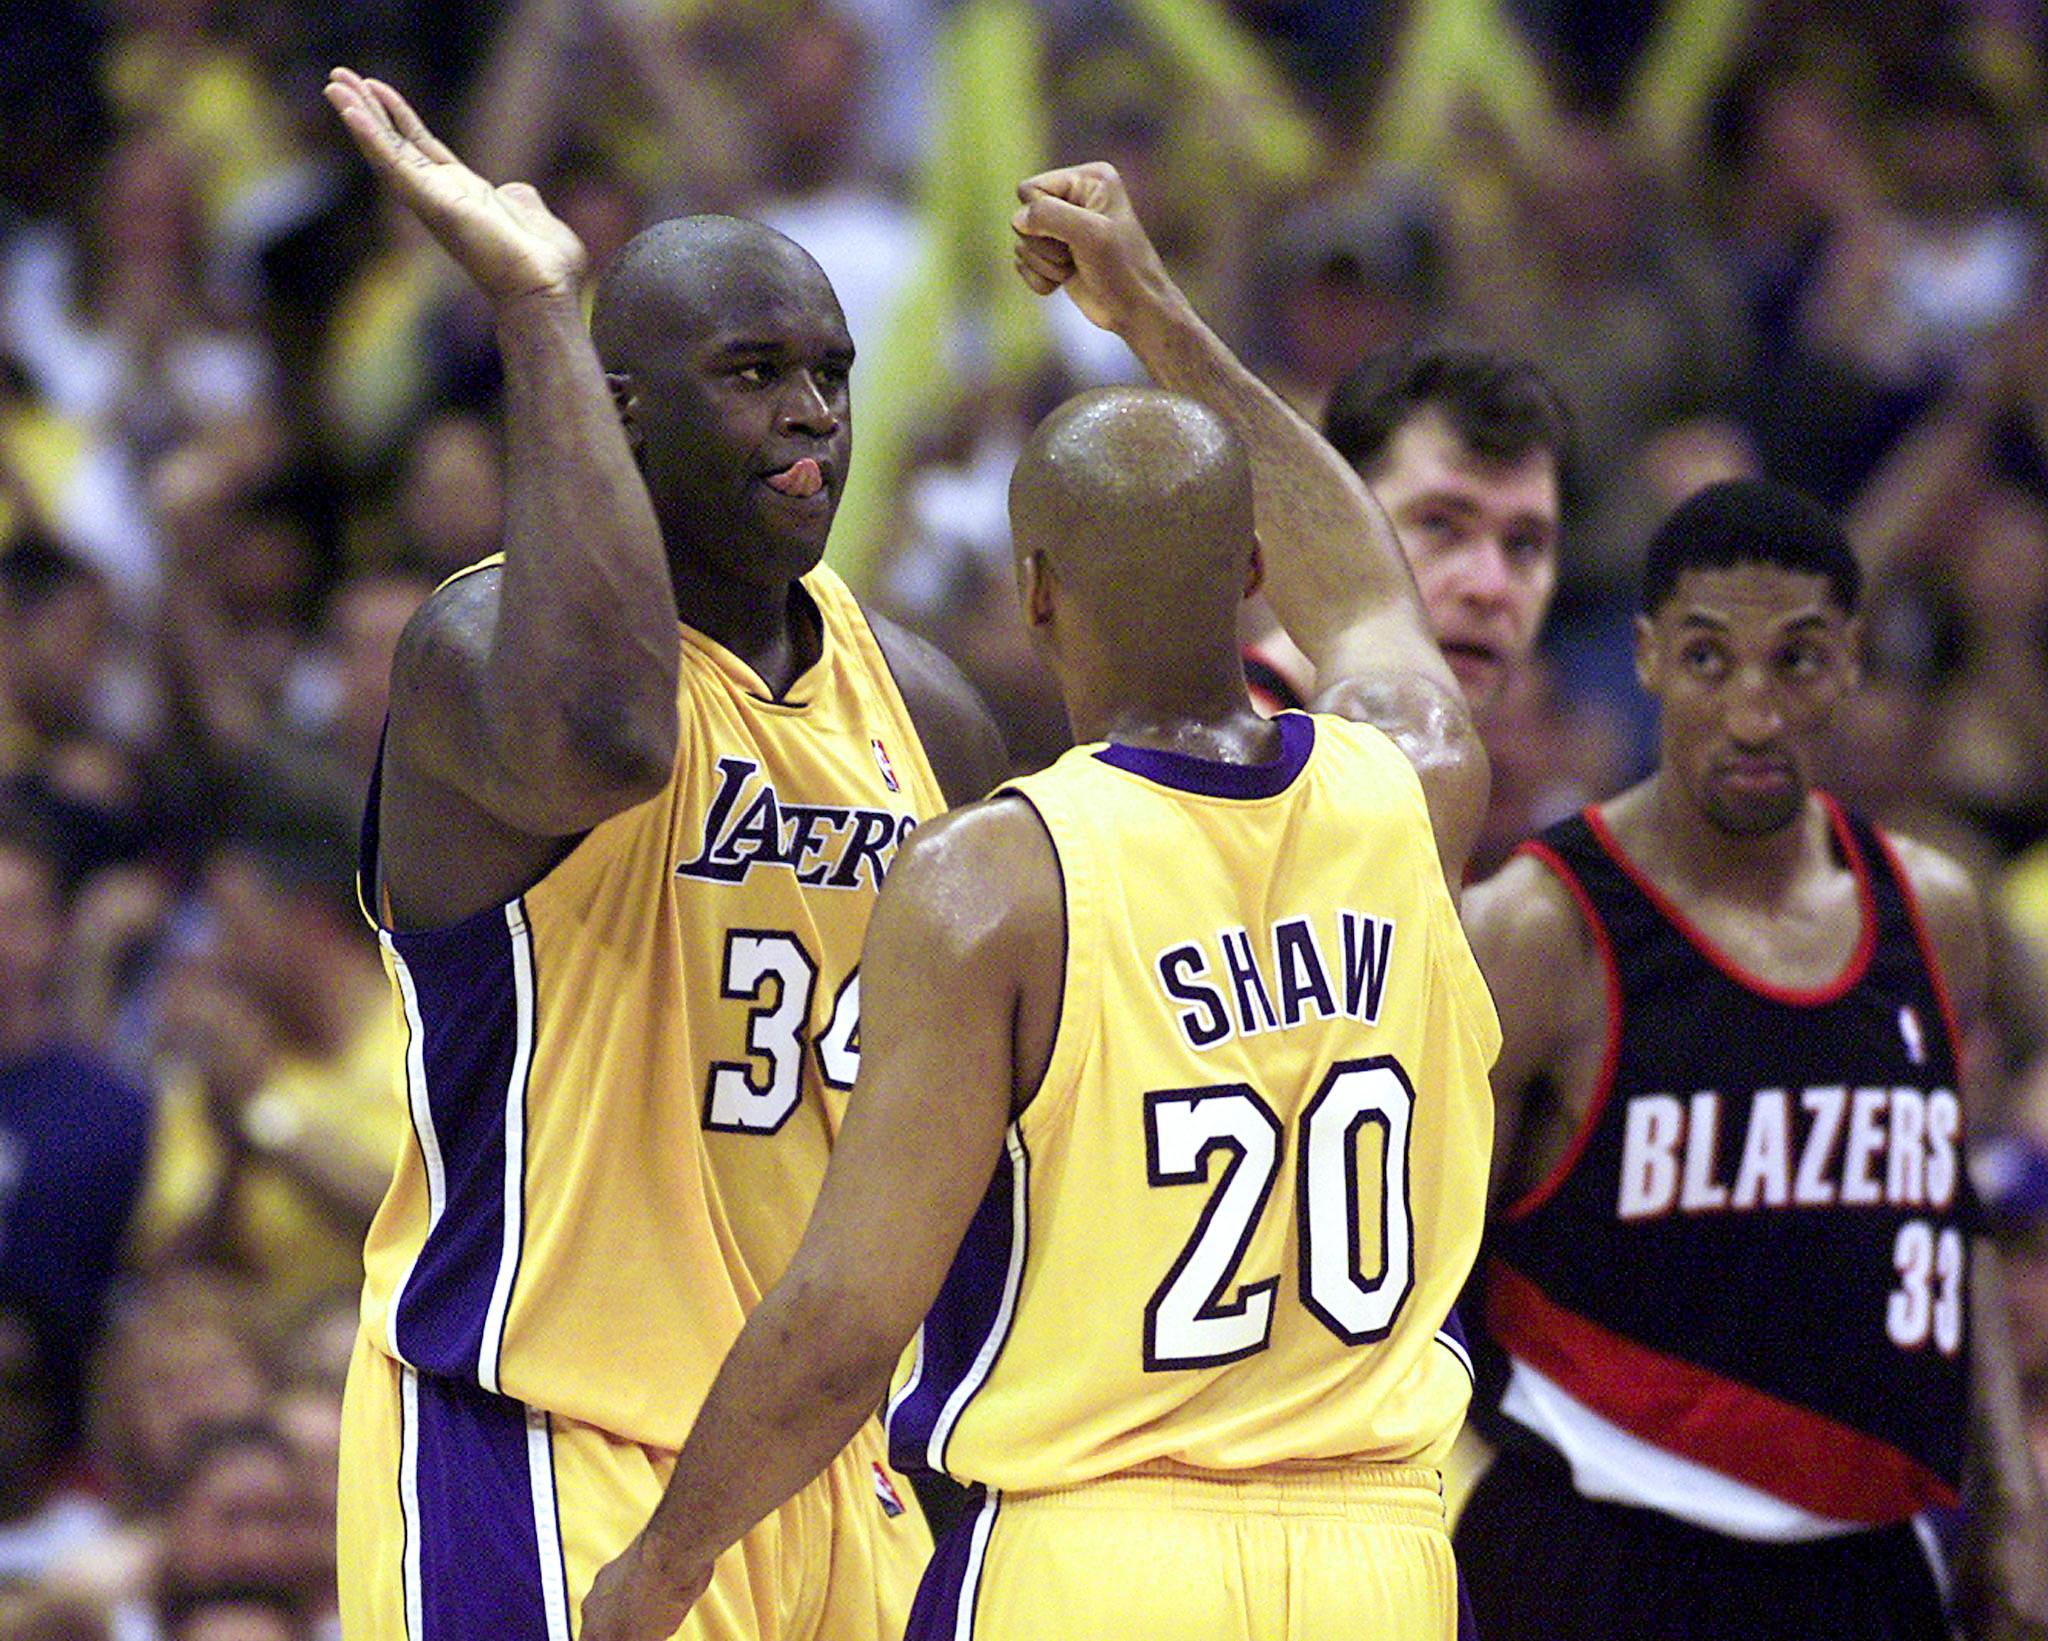 Former Lakers teammates Shaquille O'Neal and Brian Shaw high-five during the 2001 NBA Playoffs